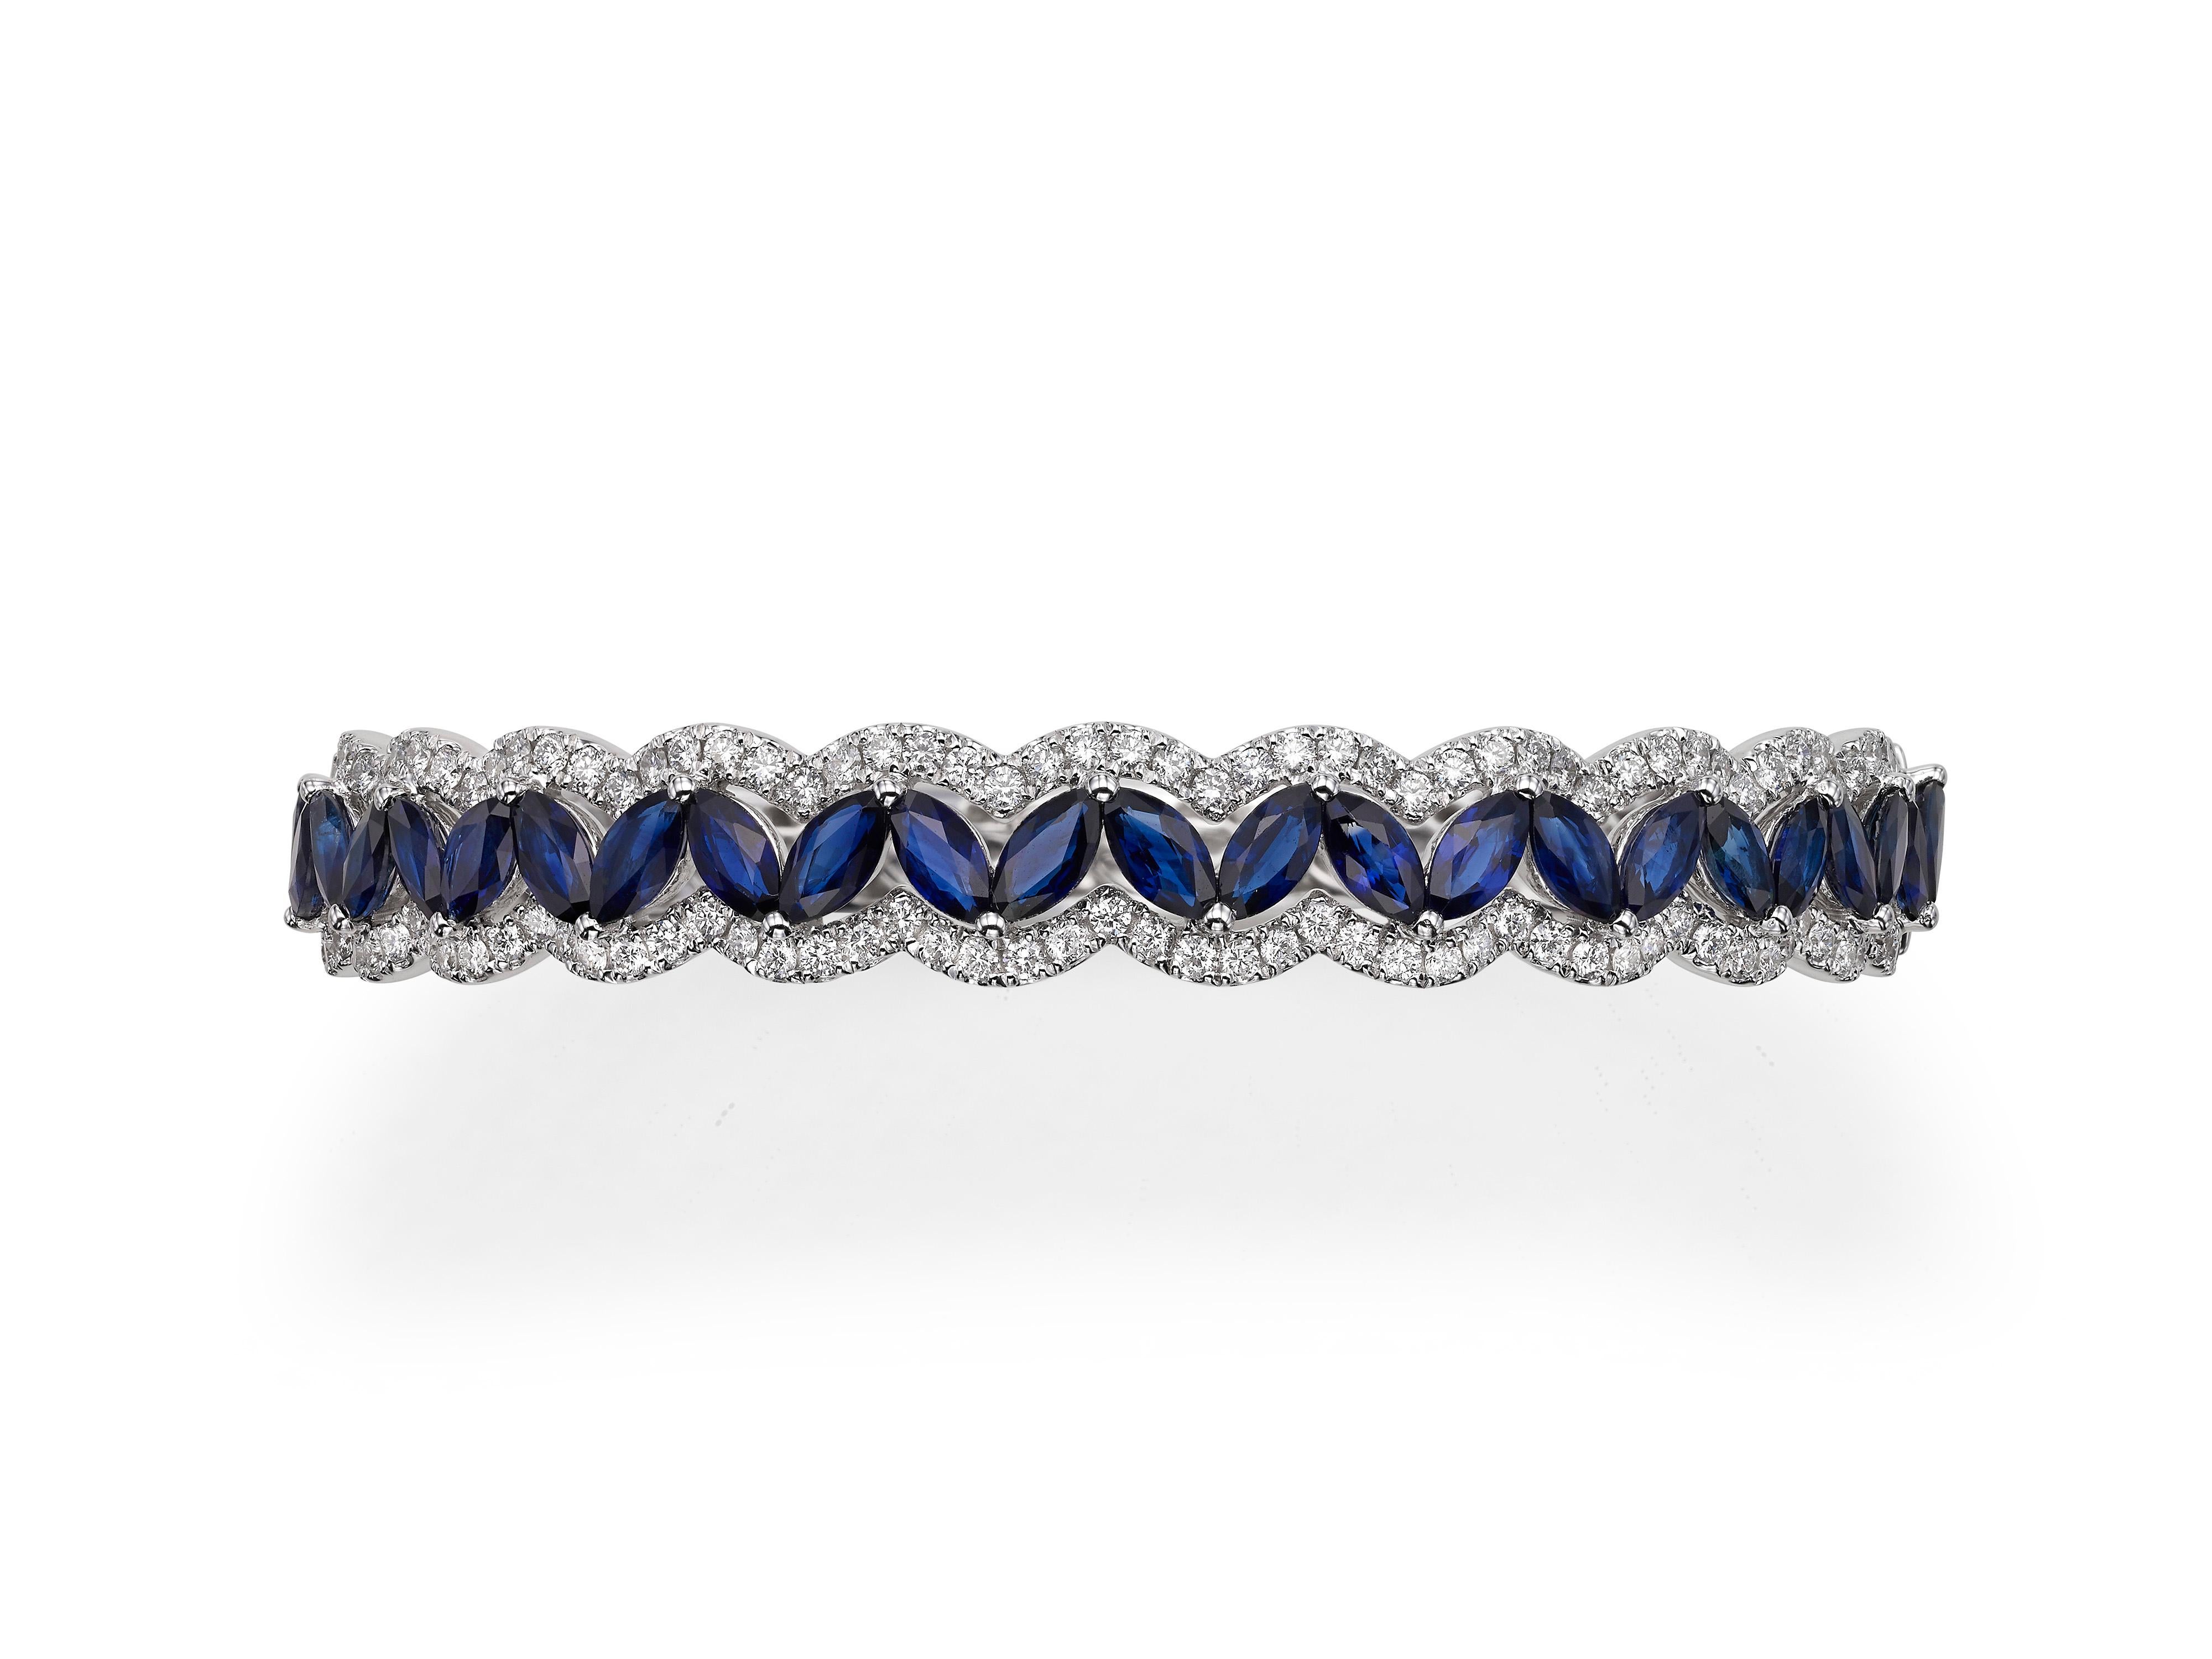 Handmade from 18K white gold, encrusted with 8.71 carats of marquise-shape blue sapphires and 1.62 carats of round brilliant cut diamonds.  Perfectly complements the Butani Marquise Sapphire Round Diamond 18 Karat White Gold Eternity Band